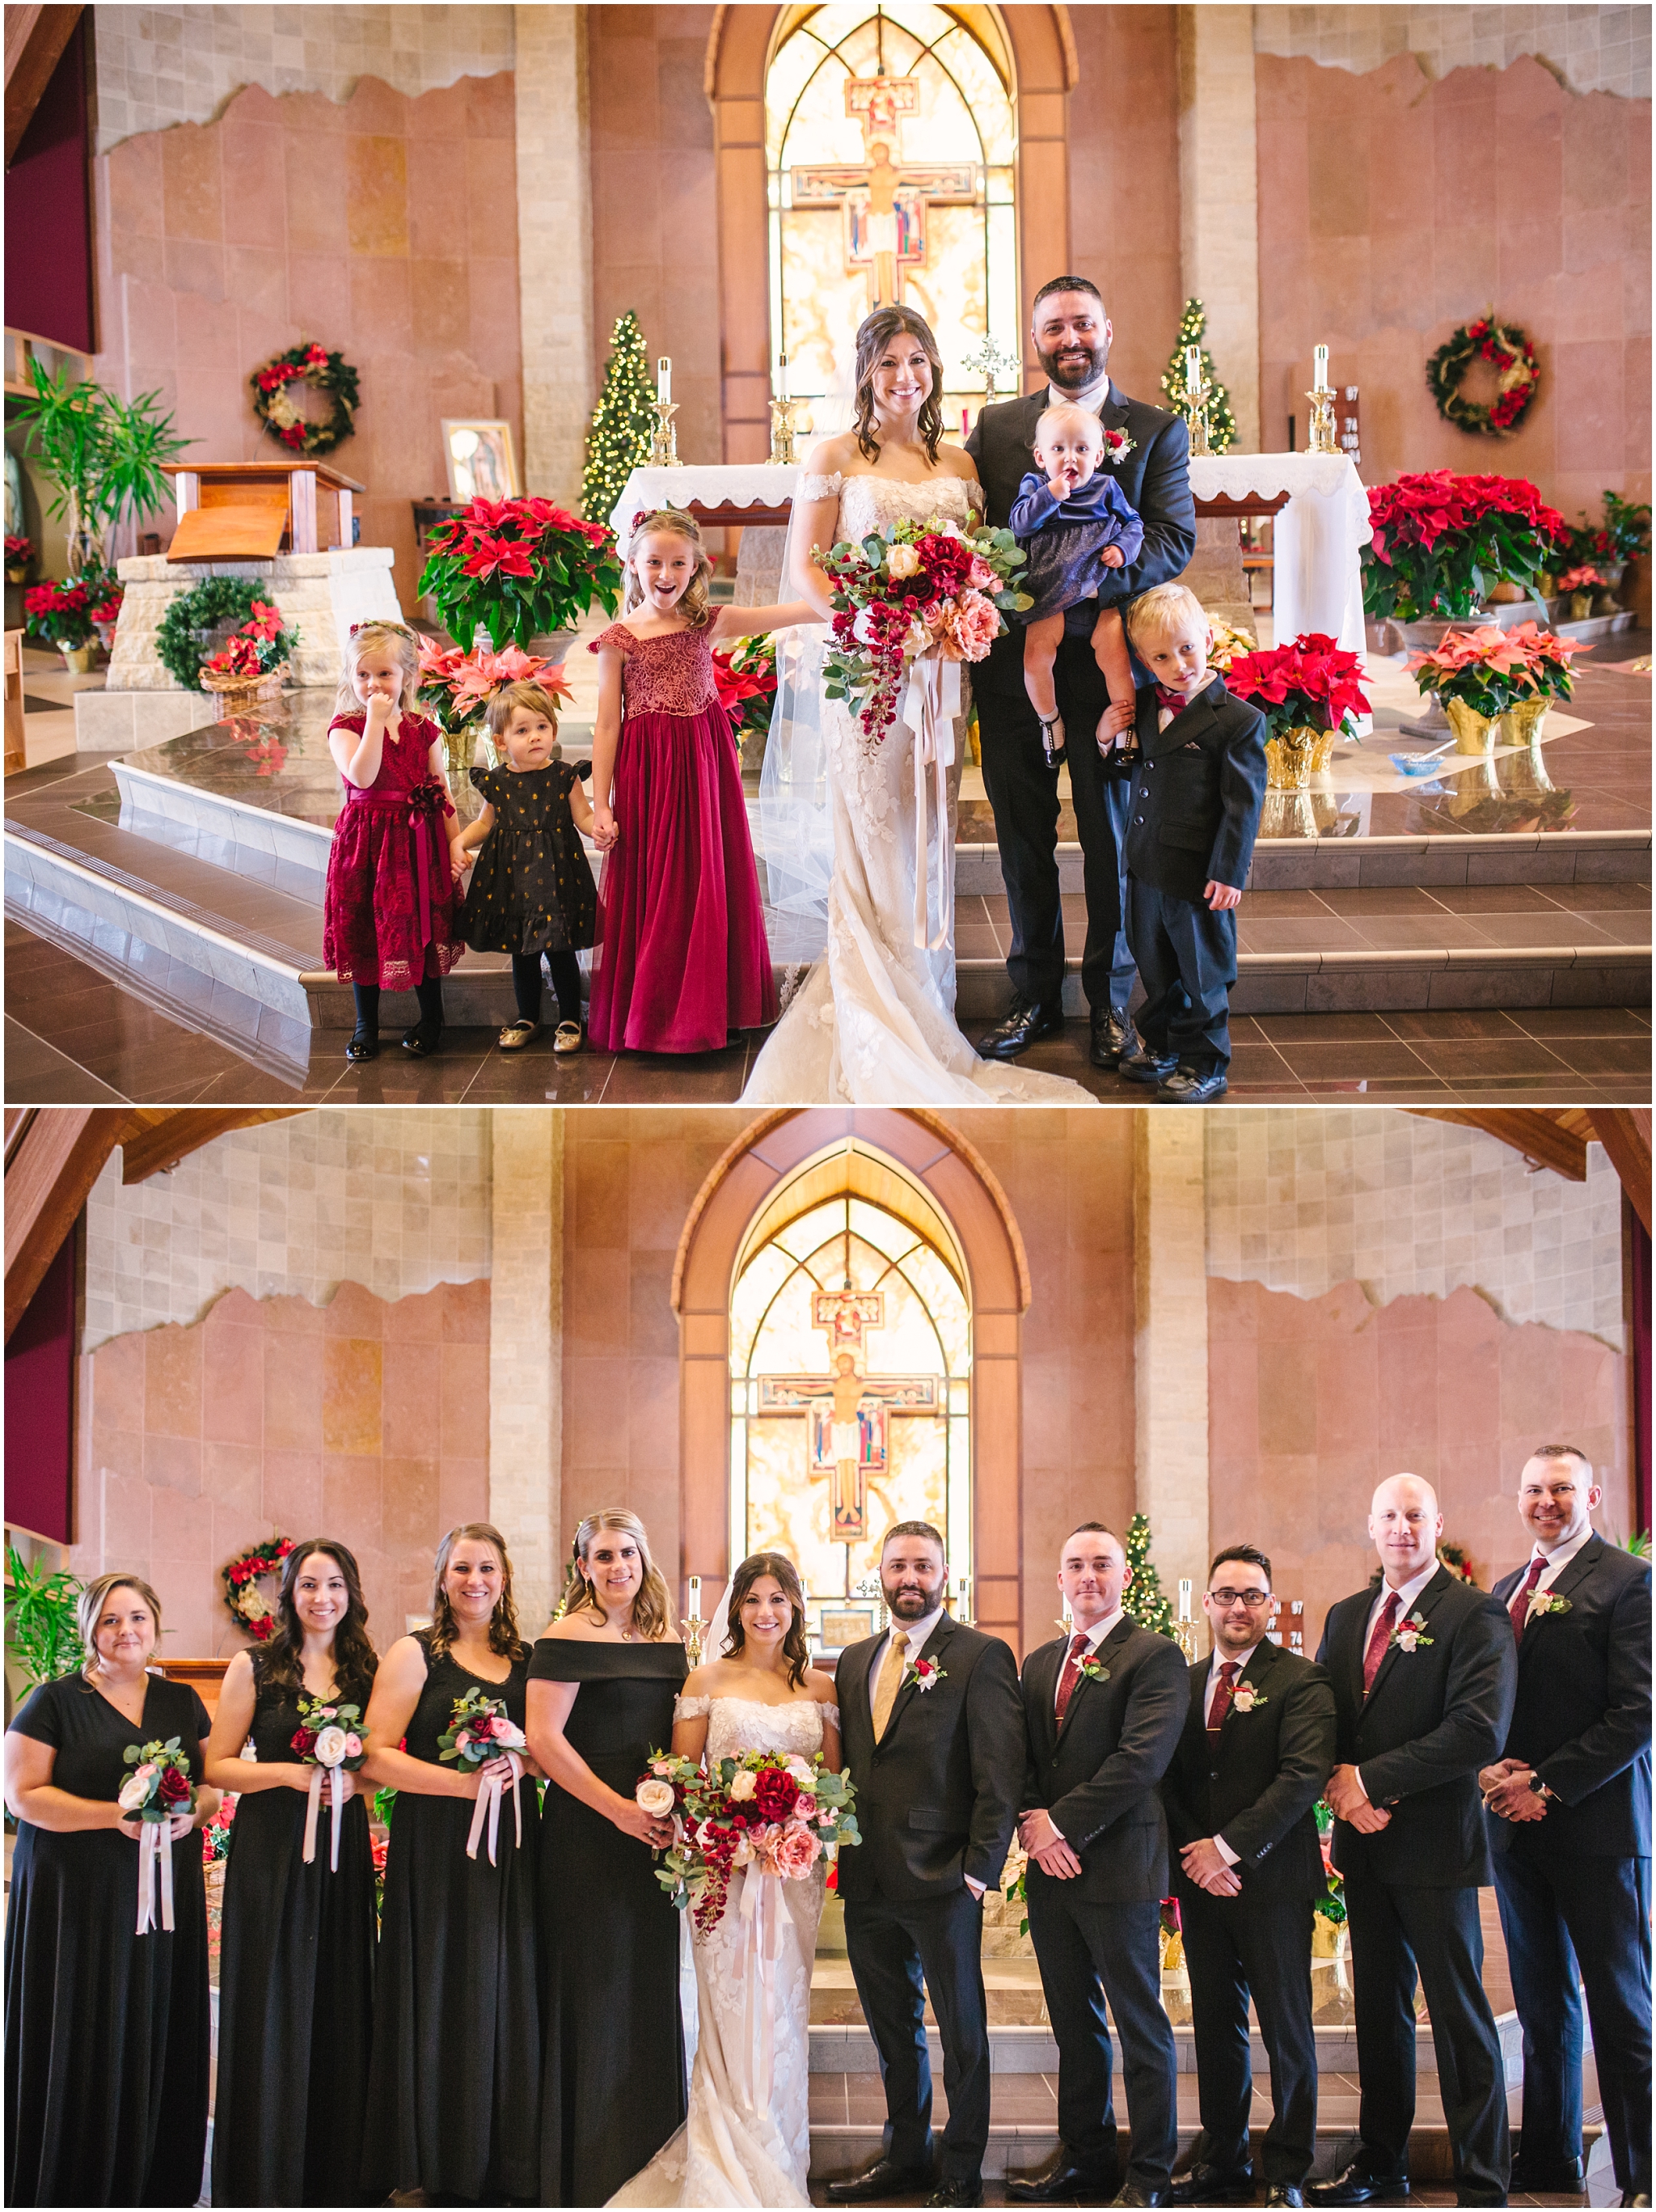 Formal bridal party portraits inside St Francis of Assisi Catholic Church